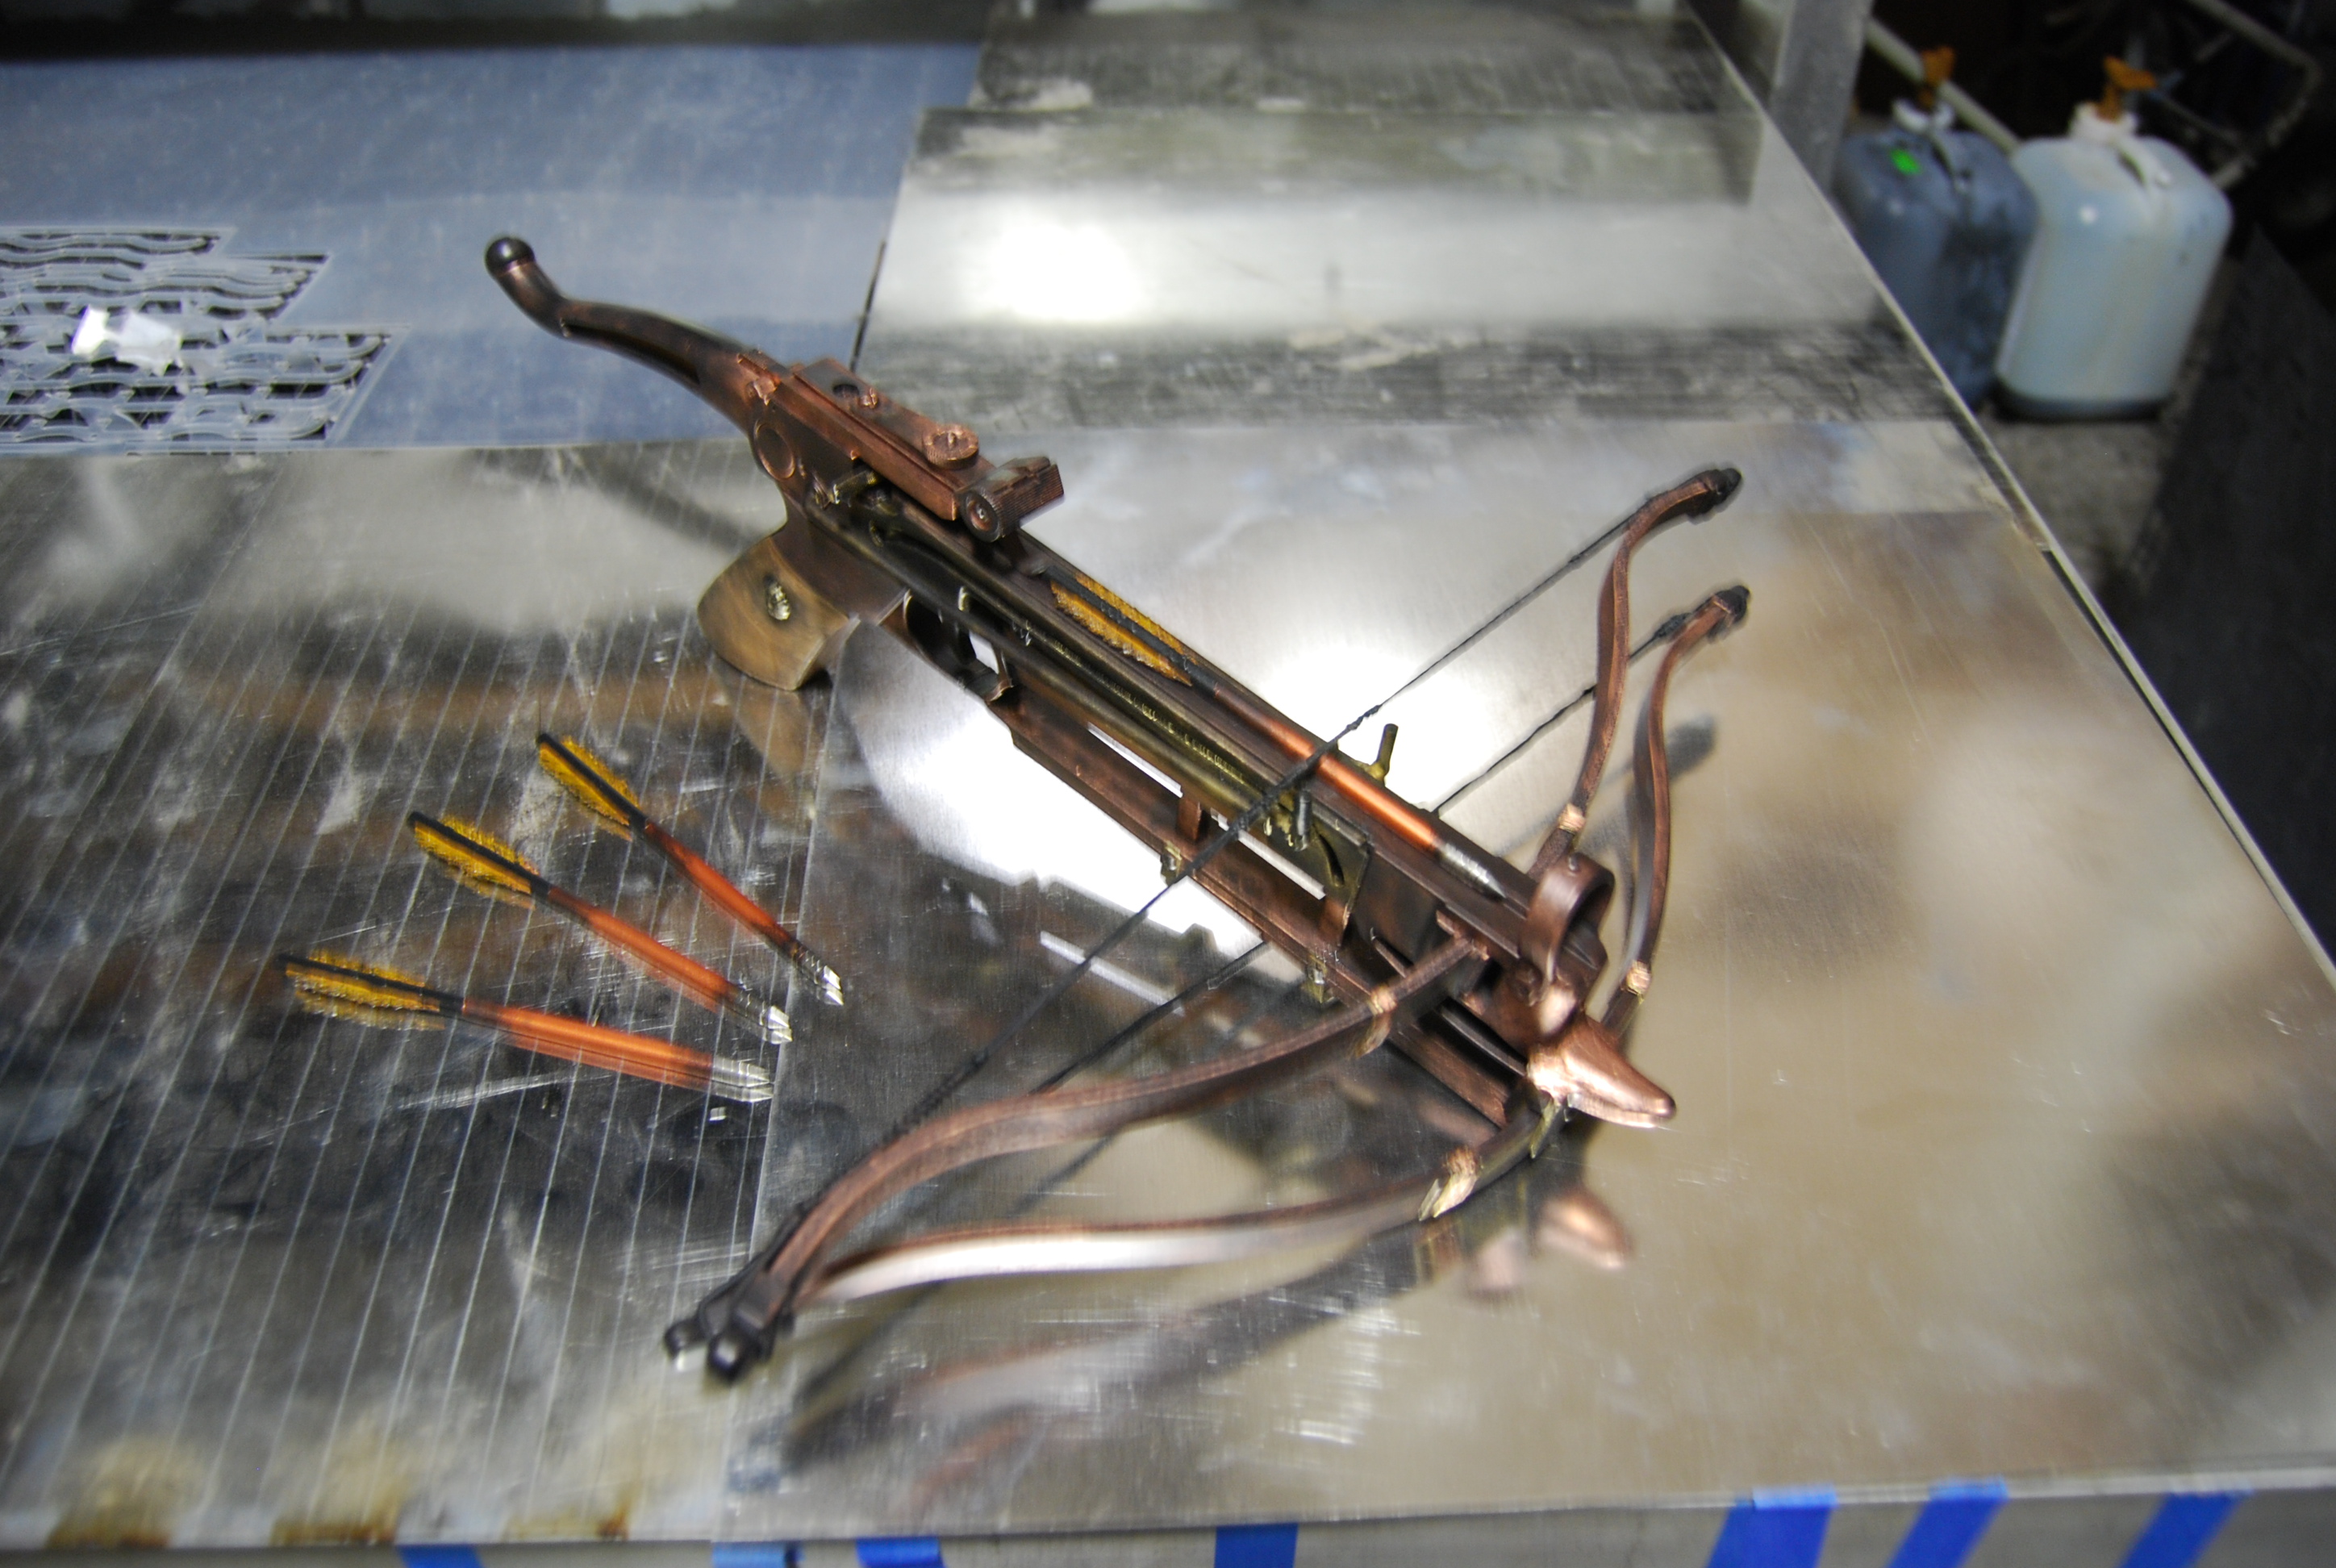 One of two crossbows created for the NBC hit series - Grimm.